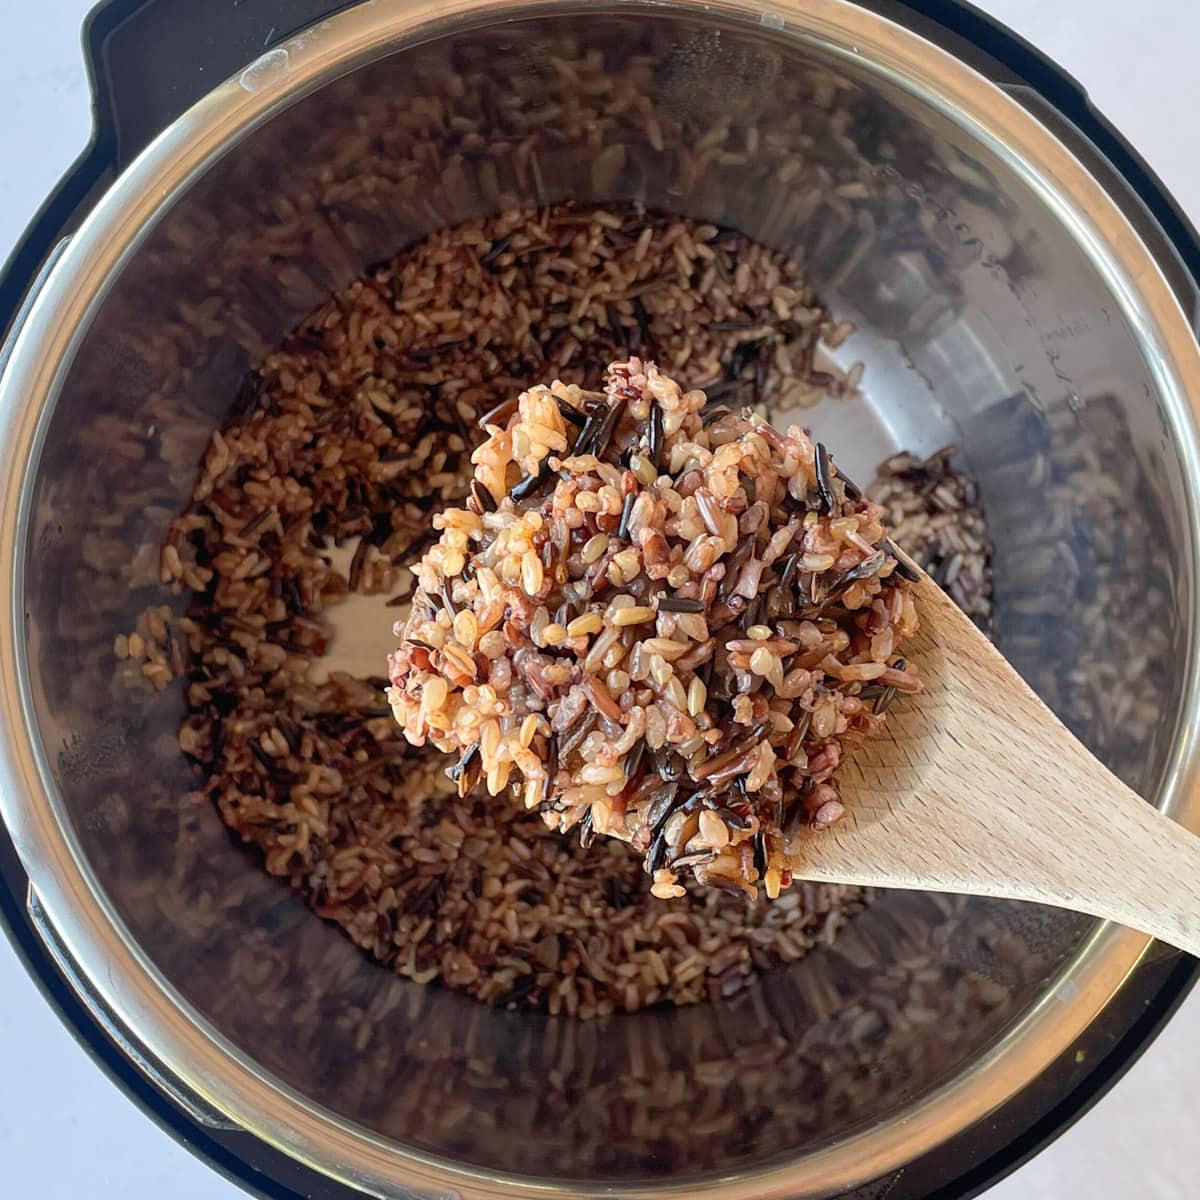 Cooked wild rice blend in a ladle on top of the instant pot